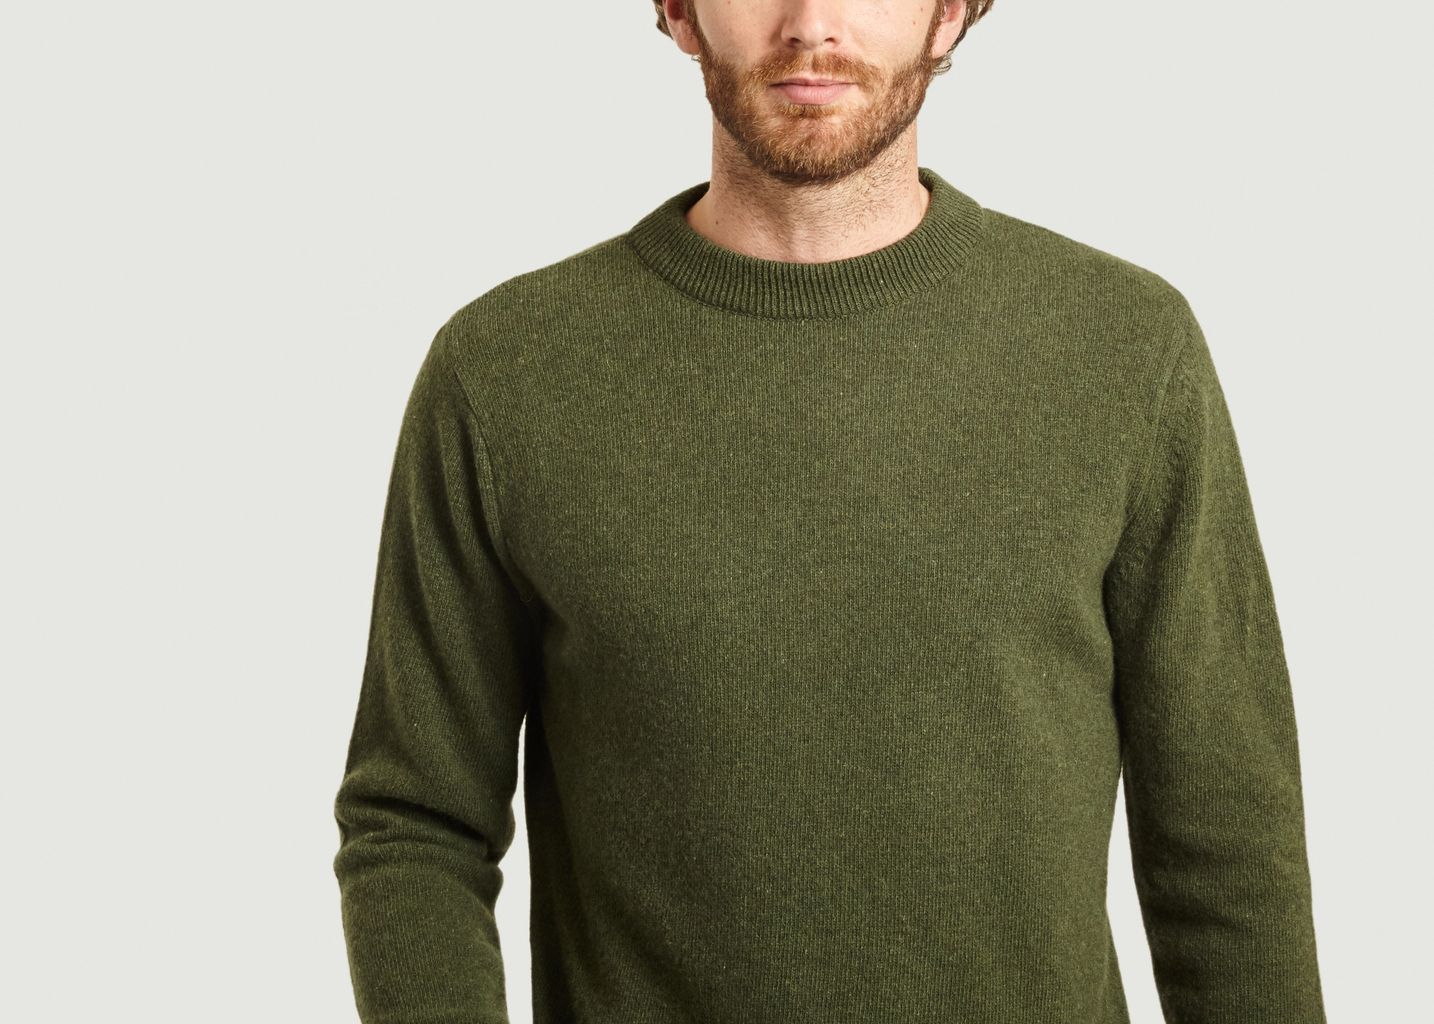 Solstice recycled knit sweater - Olow